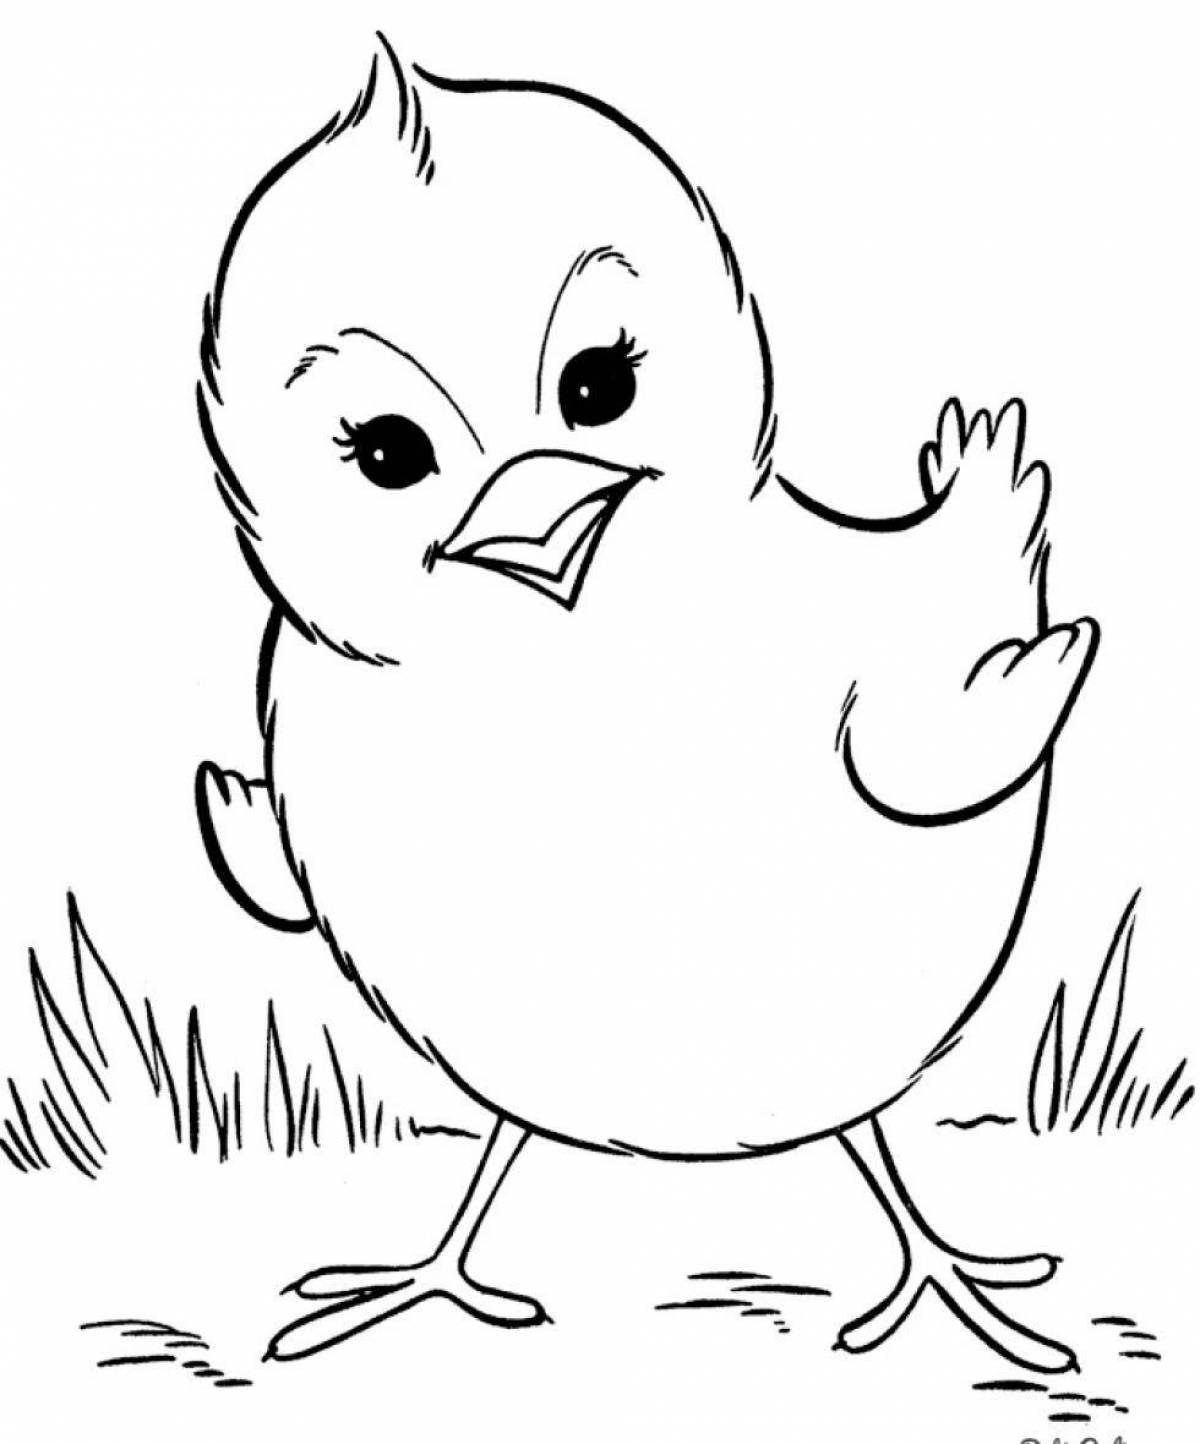 Majestic chicken in shell coloring page